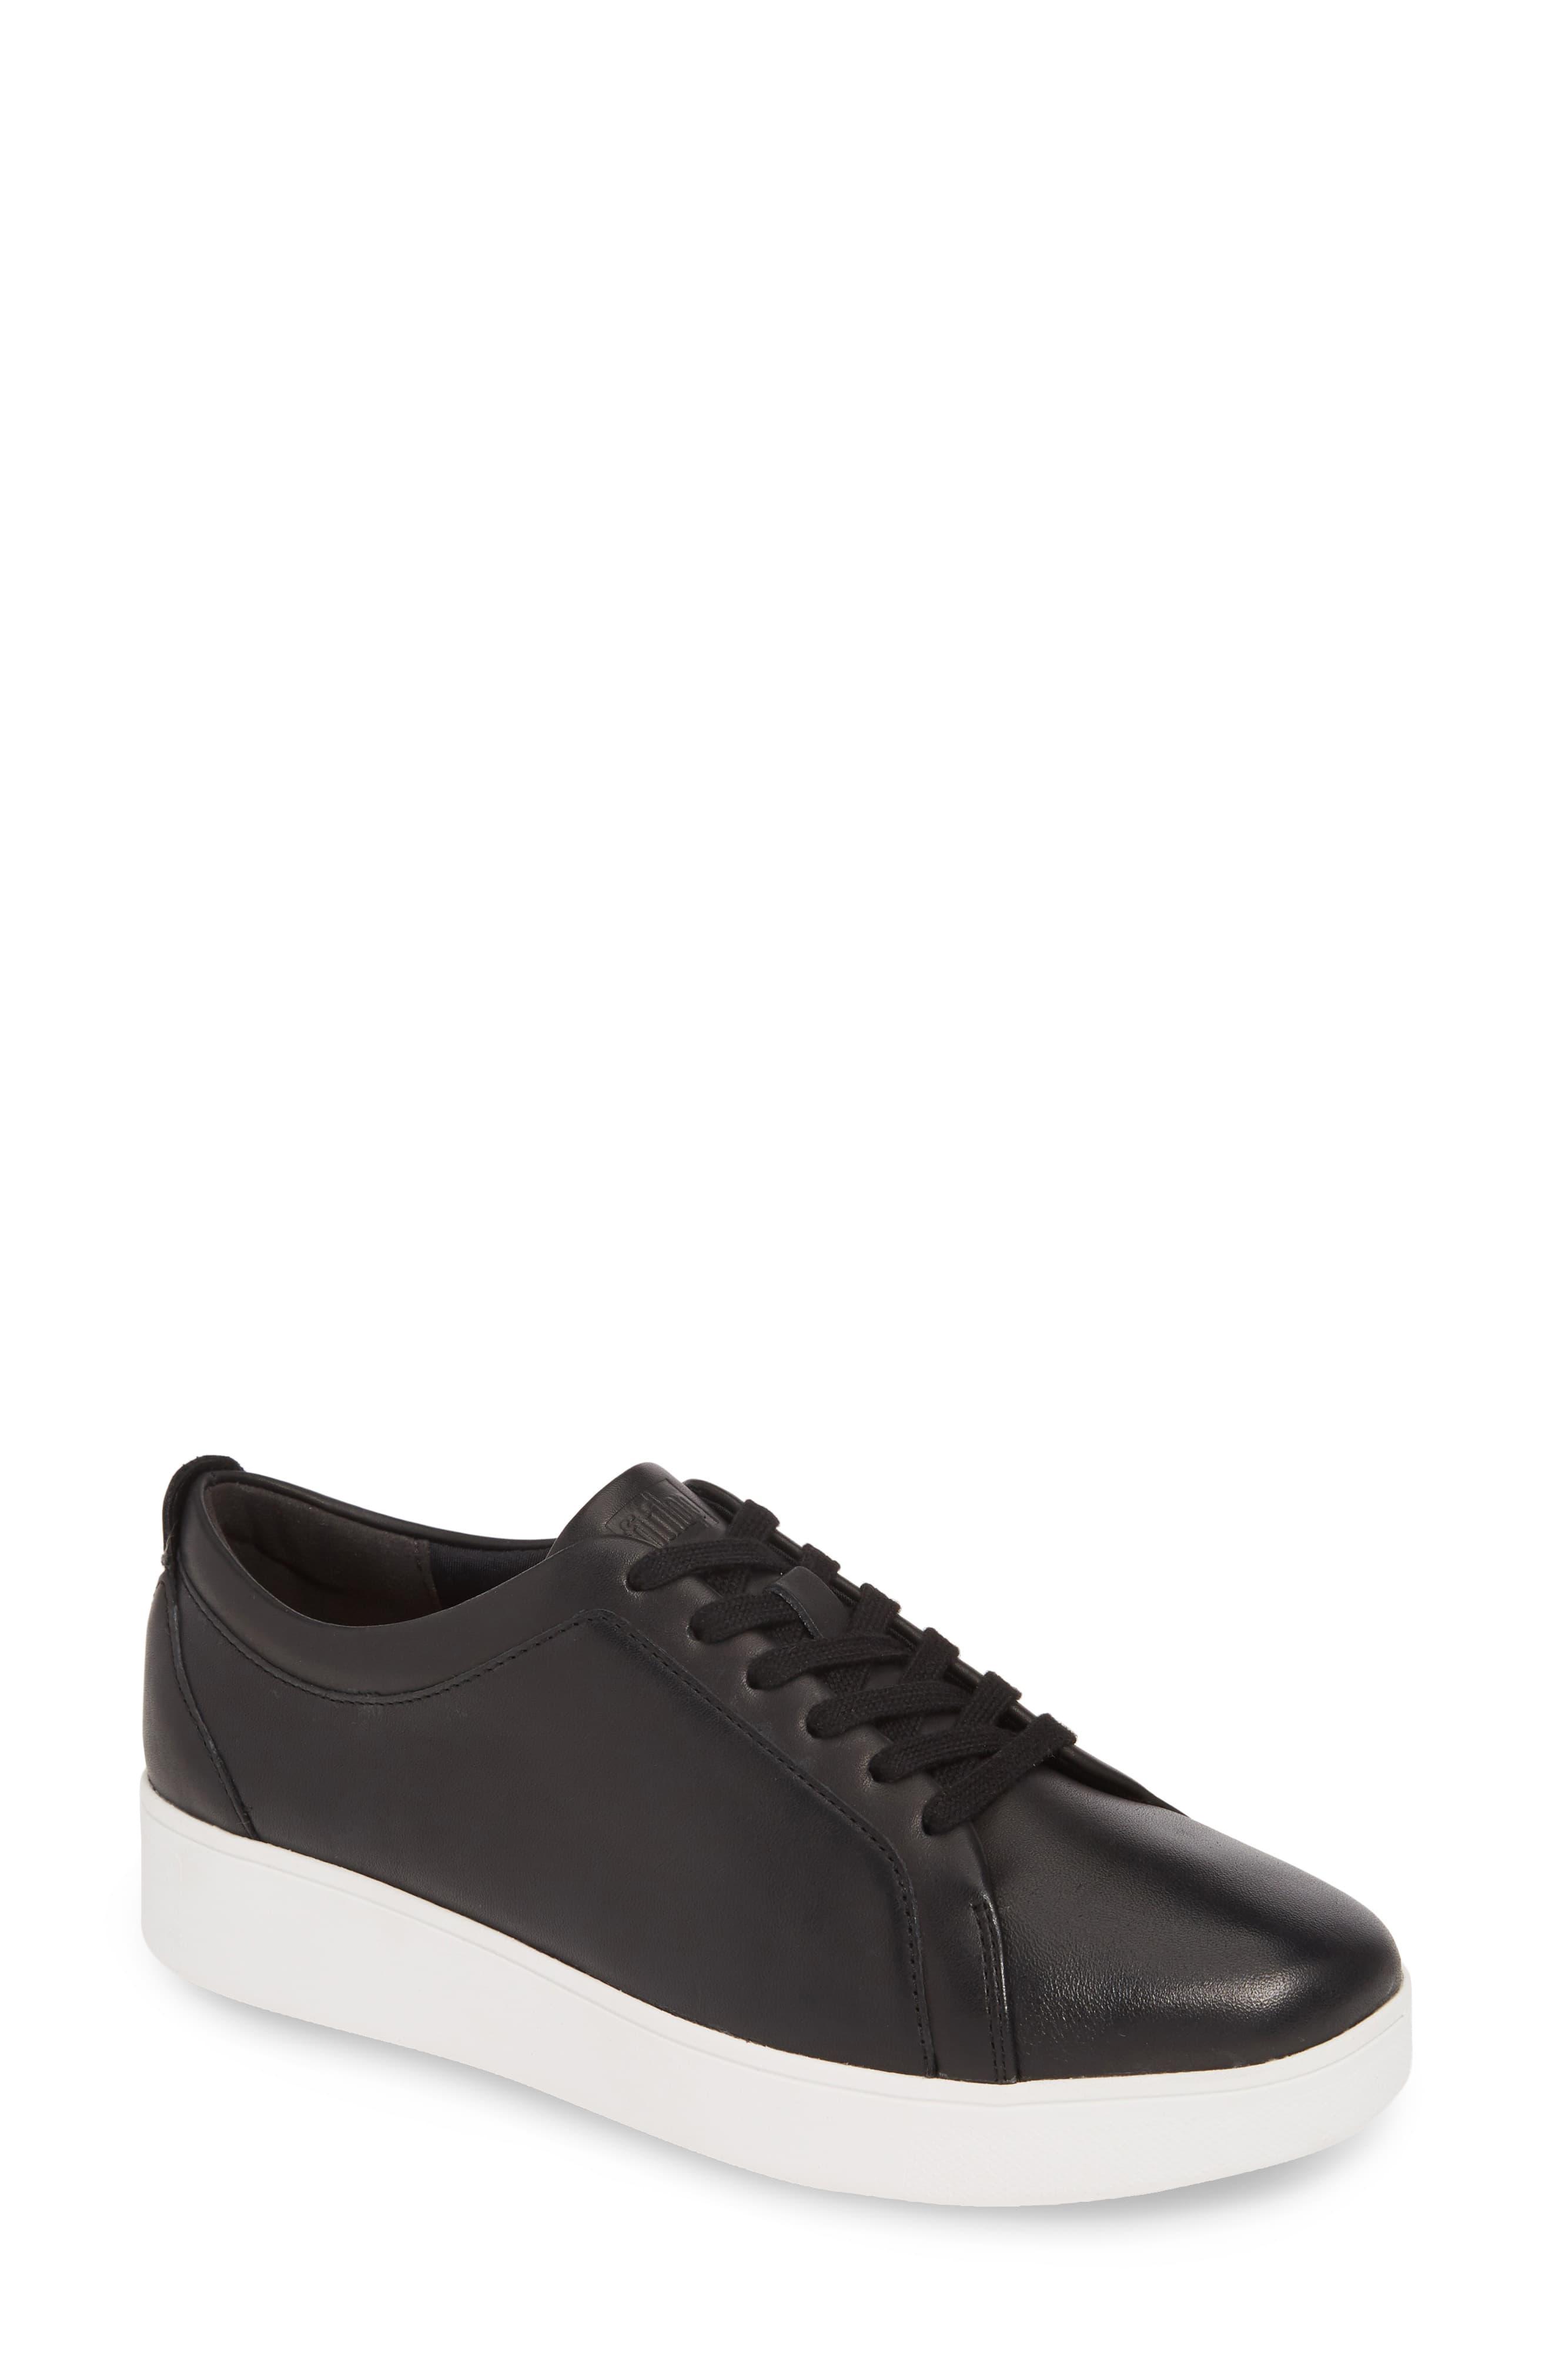 Fitflop Leather Rally Sneaker in Black Leather (Black) - Lyst